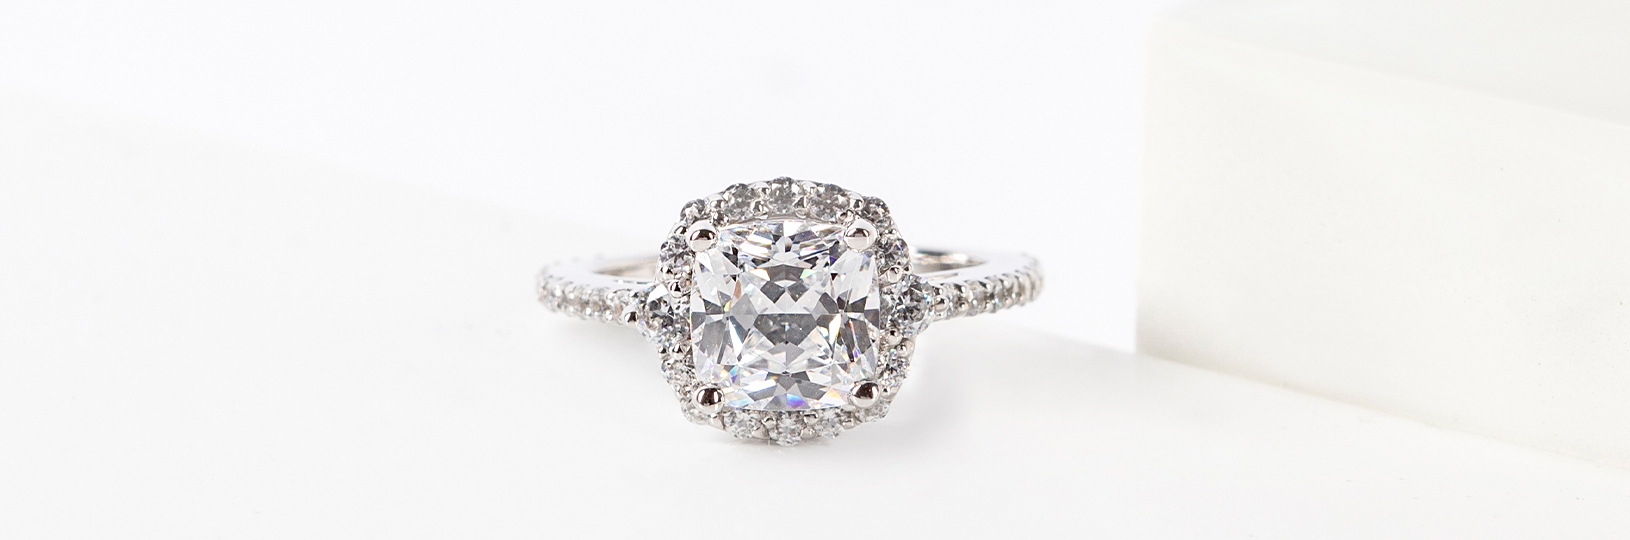 A halo engagement ring in a white gold setting